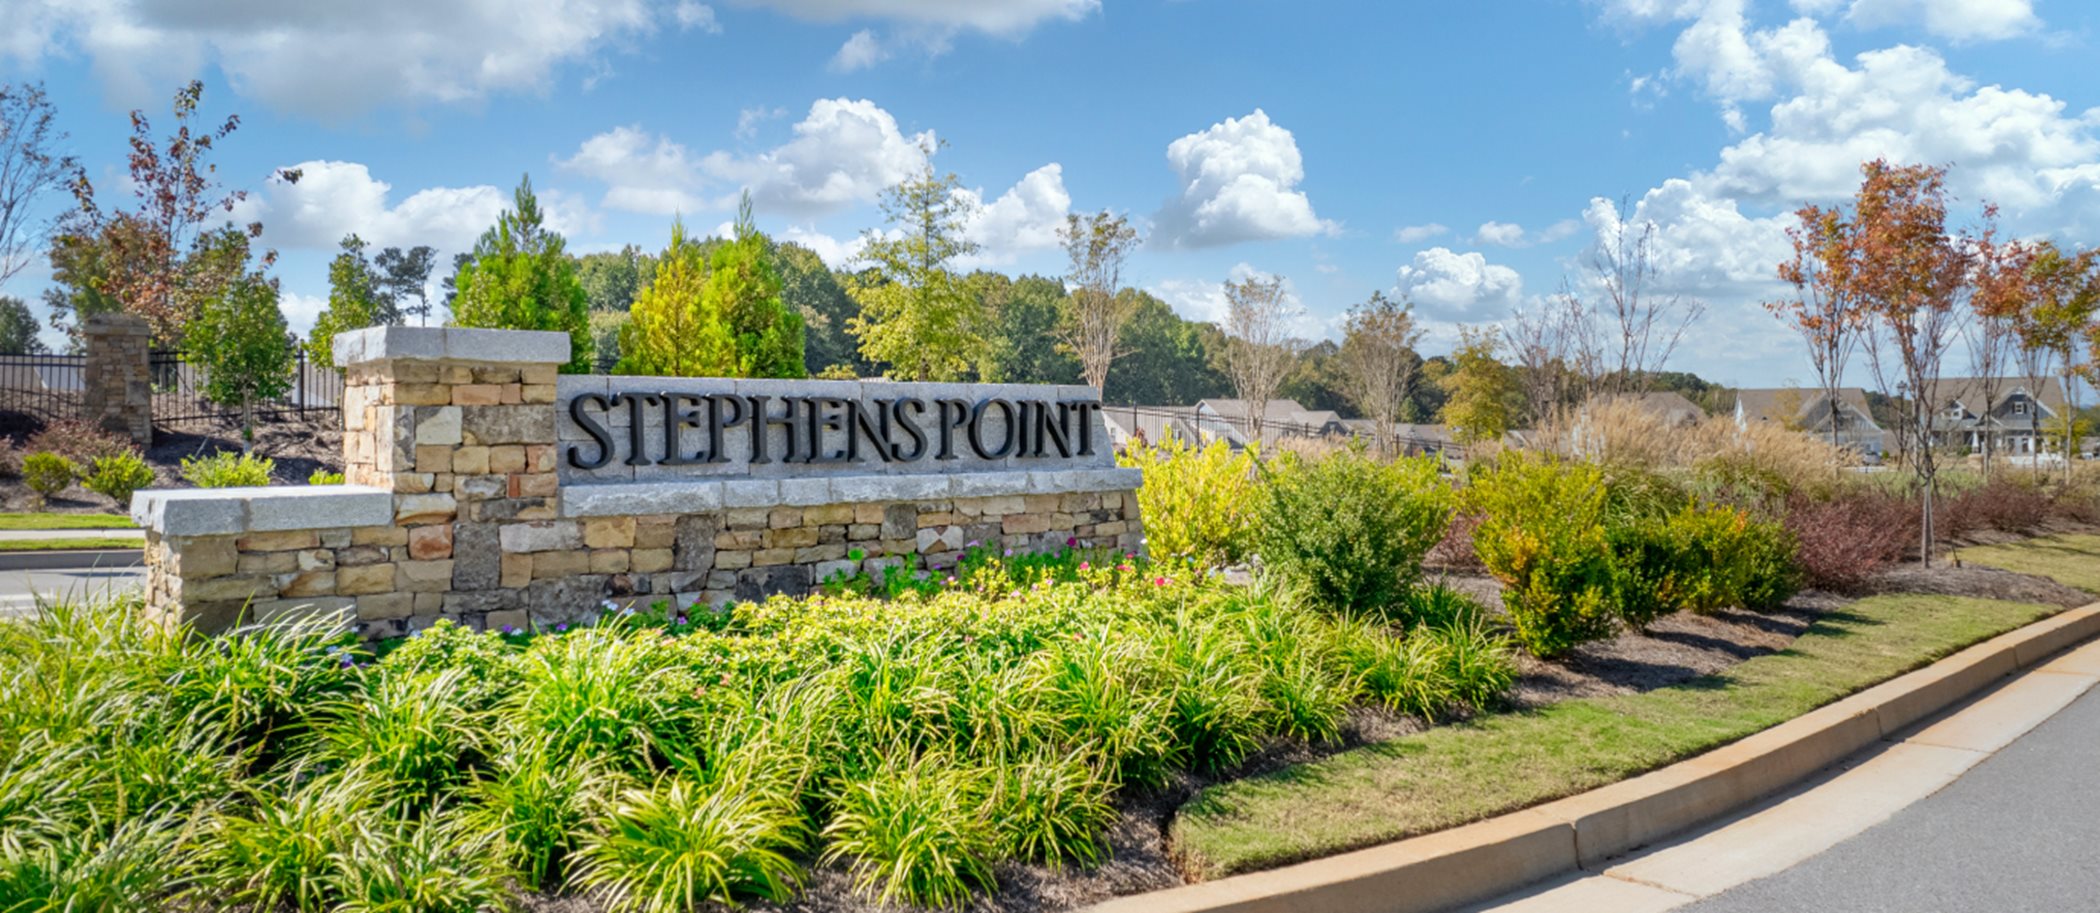 Welcome to Stephens Point